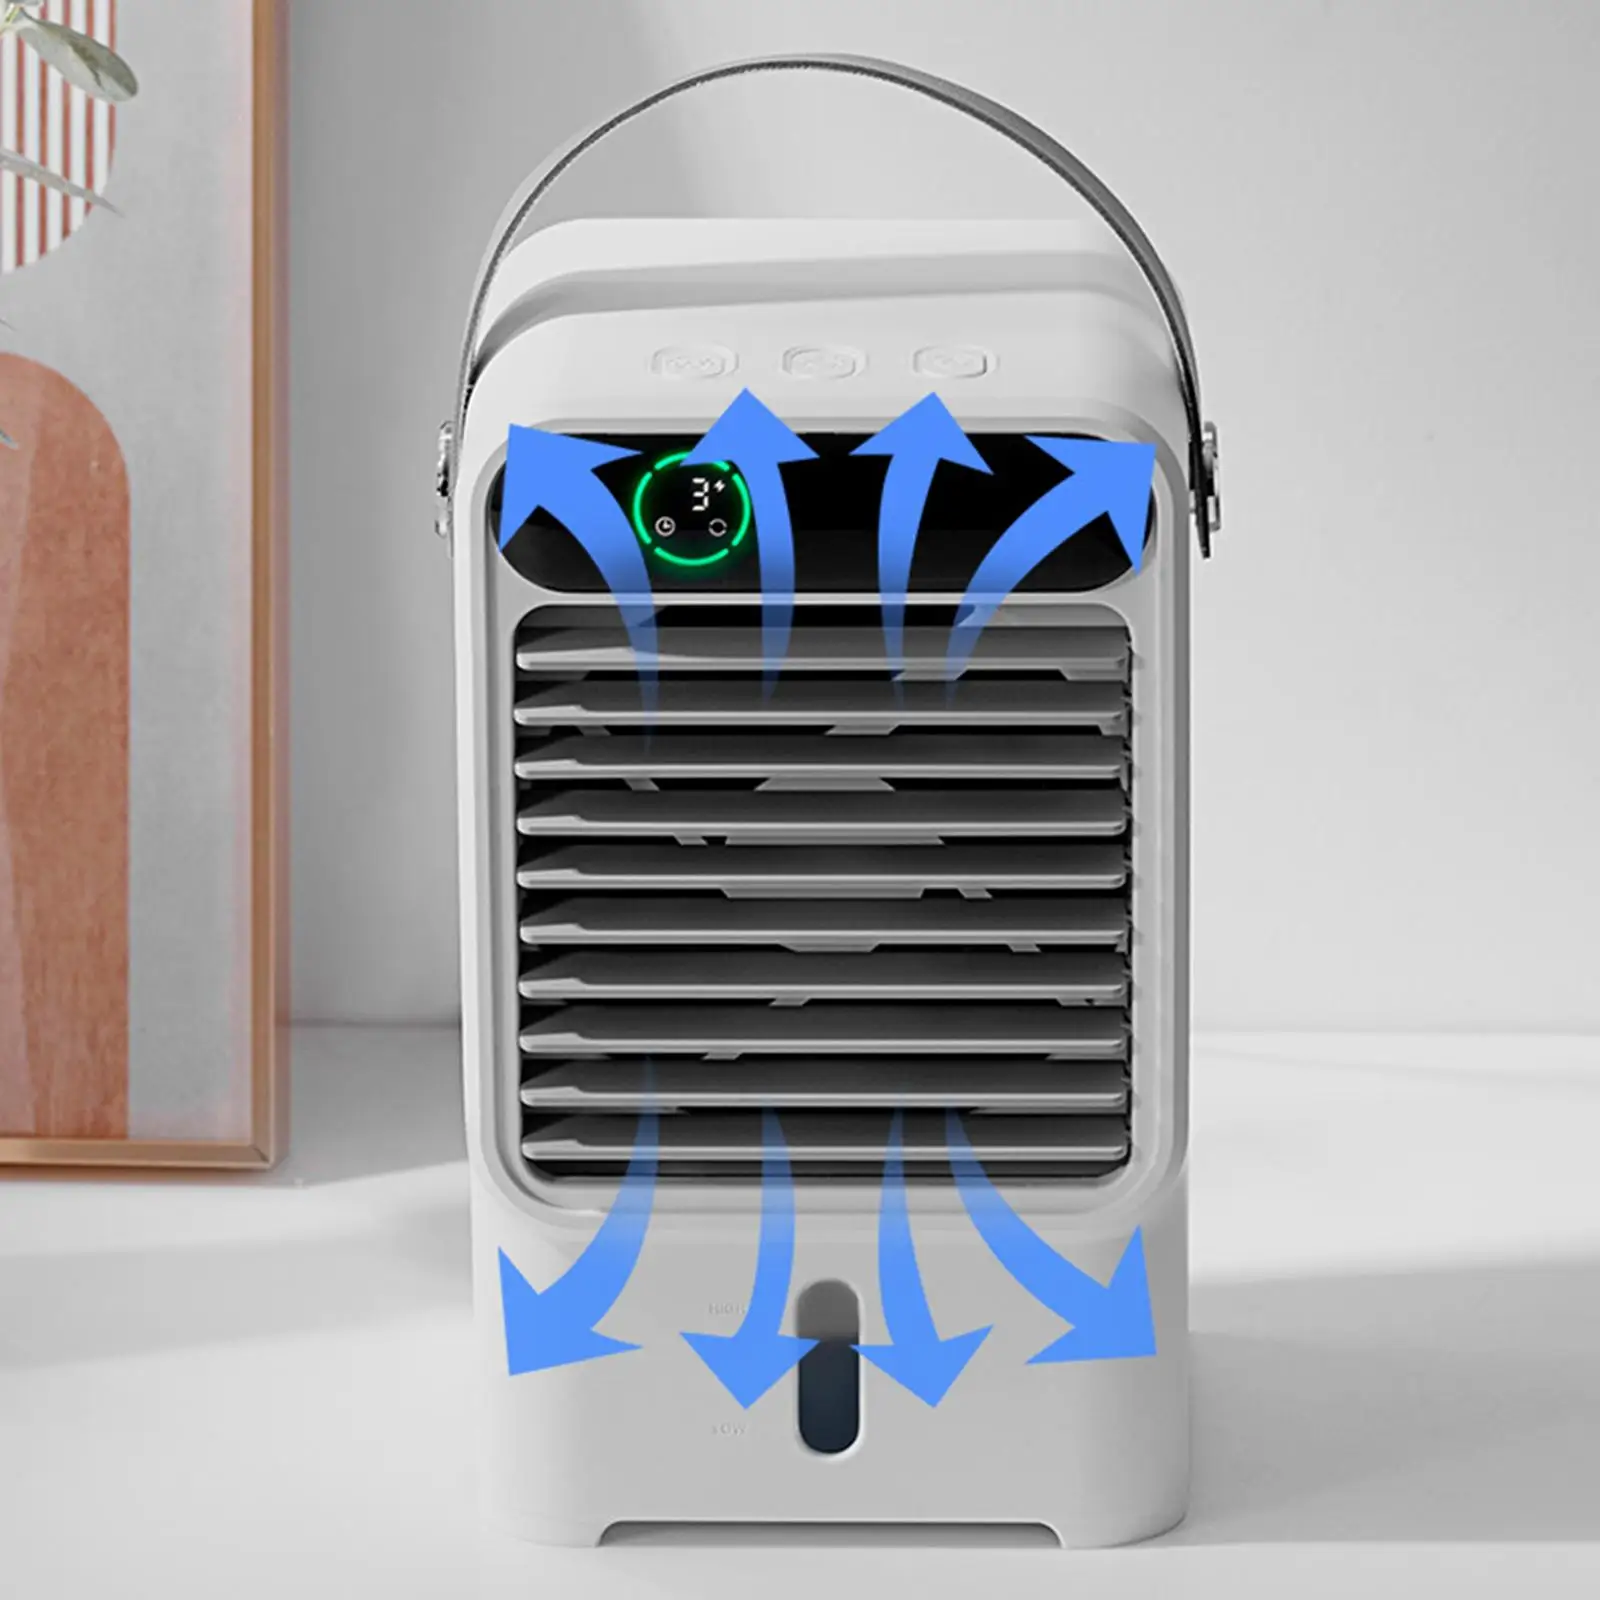 Air Conditioner 3 s Winds Desk Air Cooler Fan for Bedroom Room Office